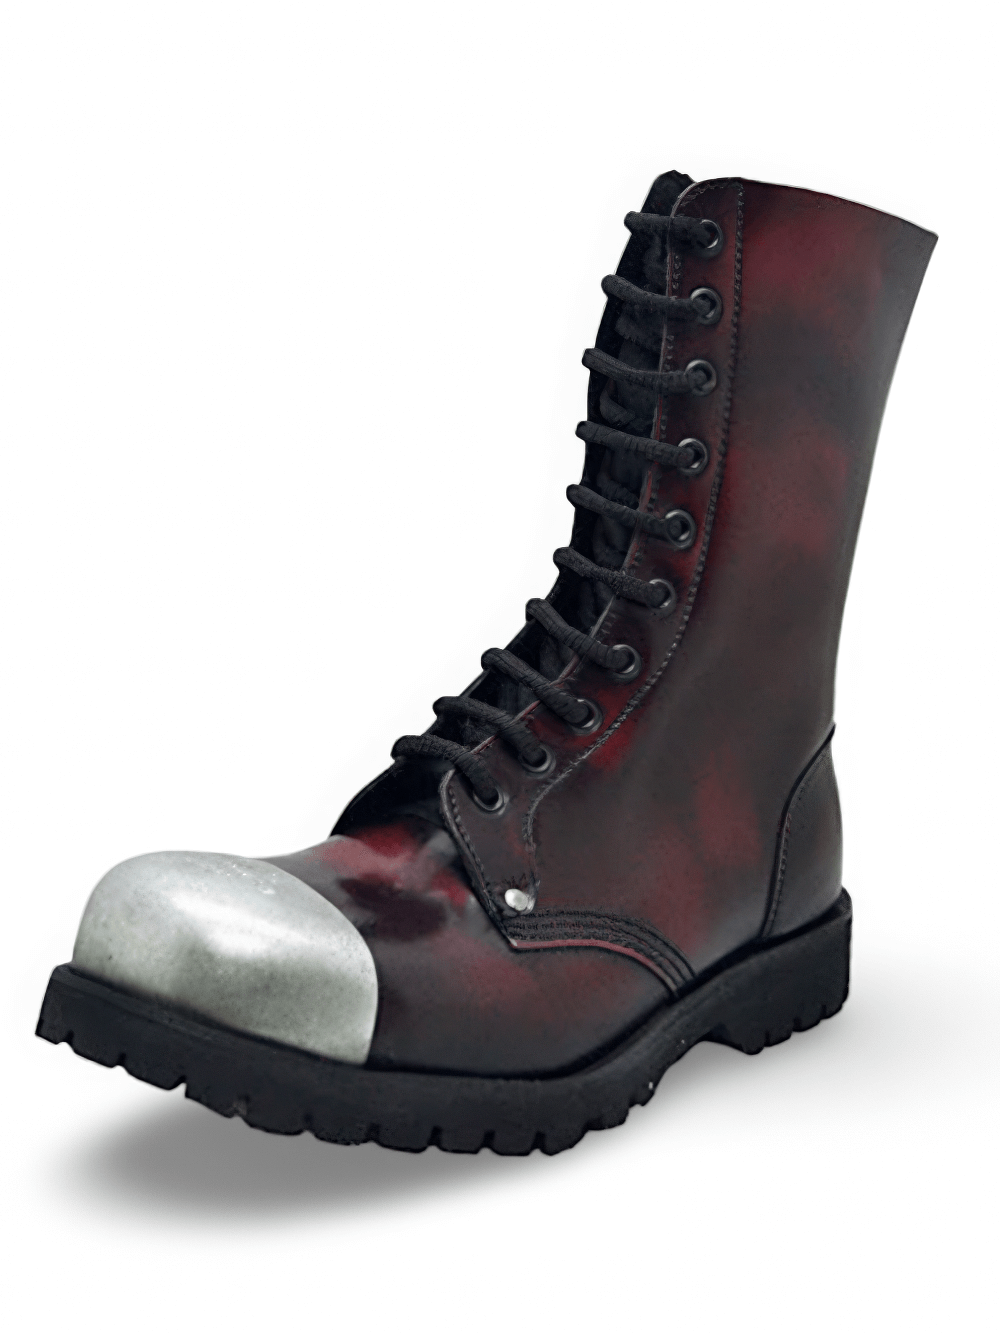 Unisex 10-Hole Wine Red Leather Rangers with Steel Toe Cap